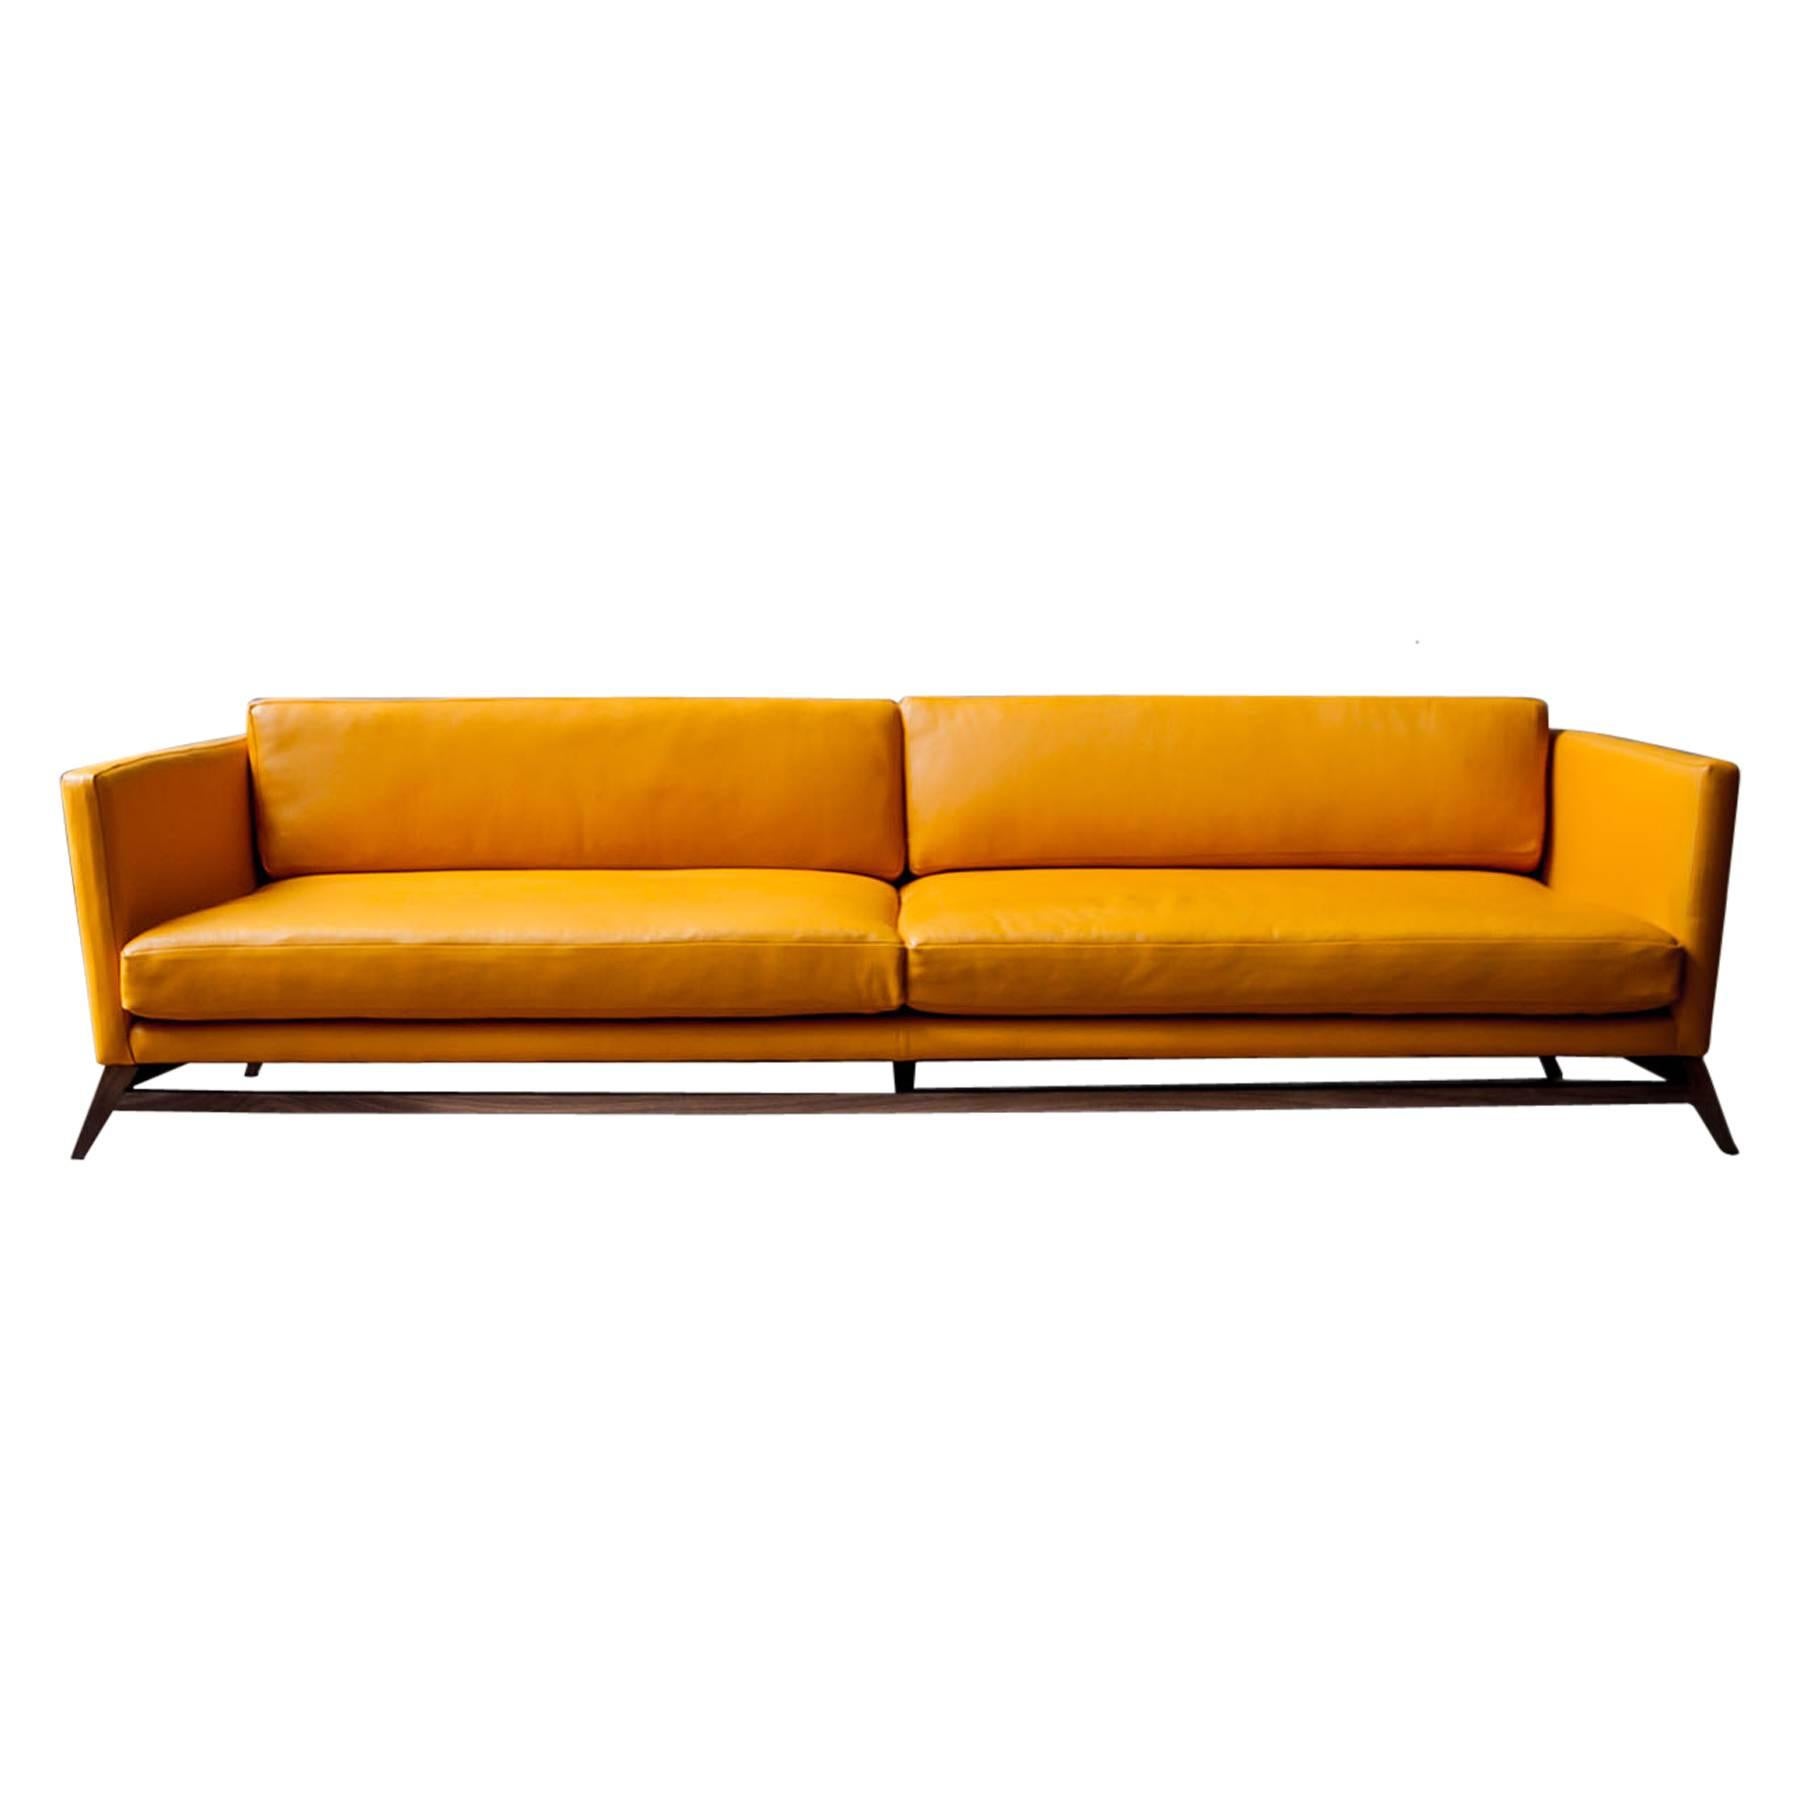 Luteca Eclipse Sofa Handcrafted in Mexico with Wood and Leather (Modern Design)